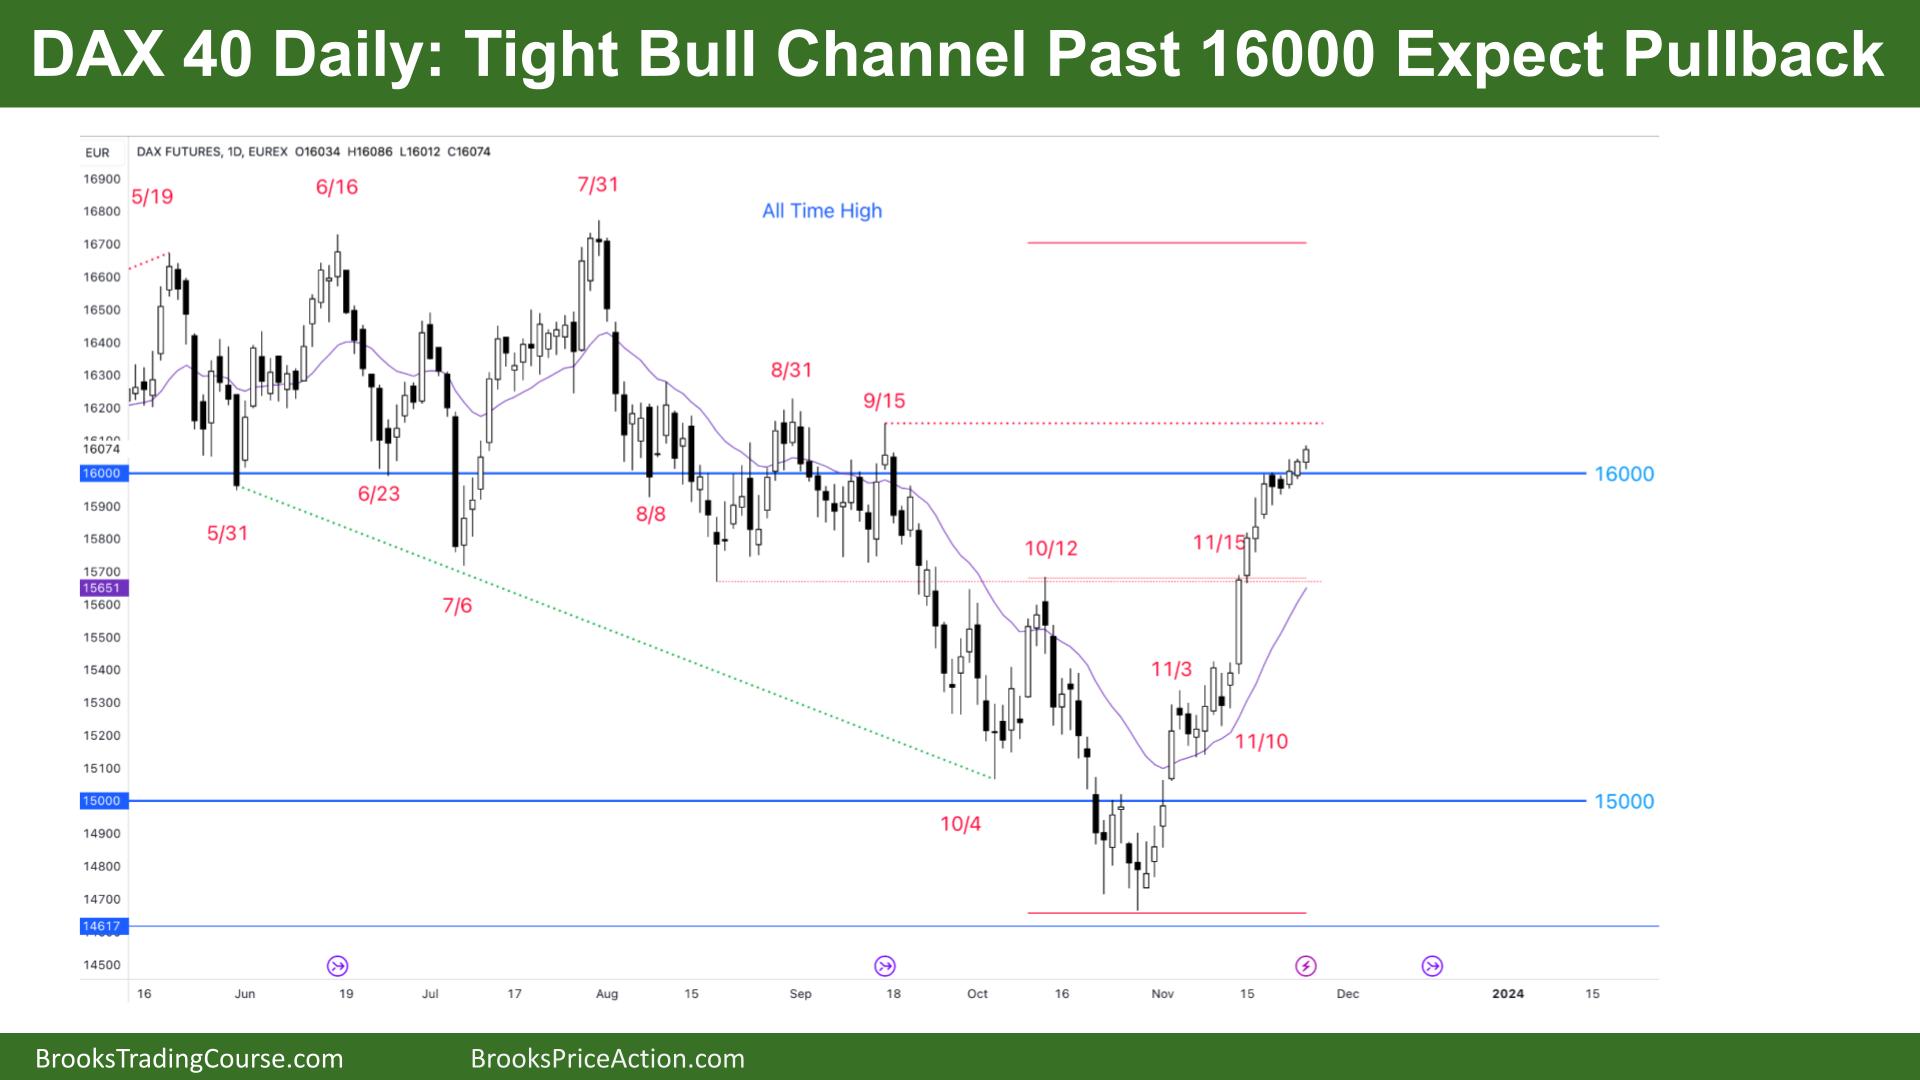 DAX 40 Tight Bull Channel Past 16000 Expect Pullback